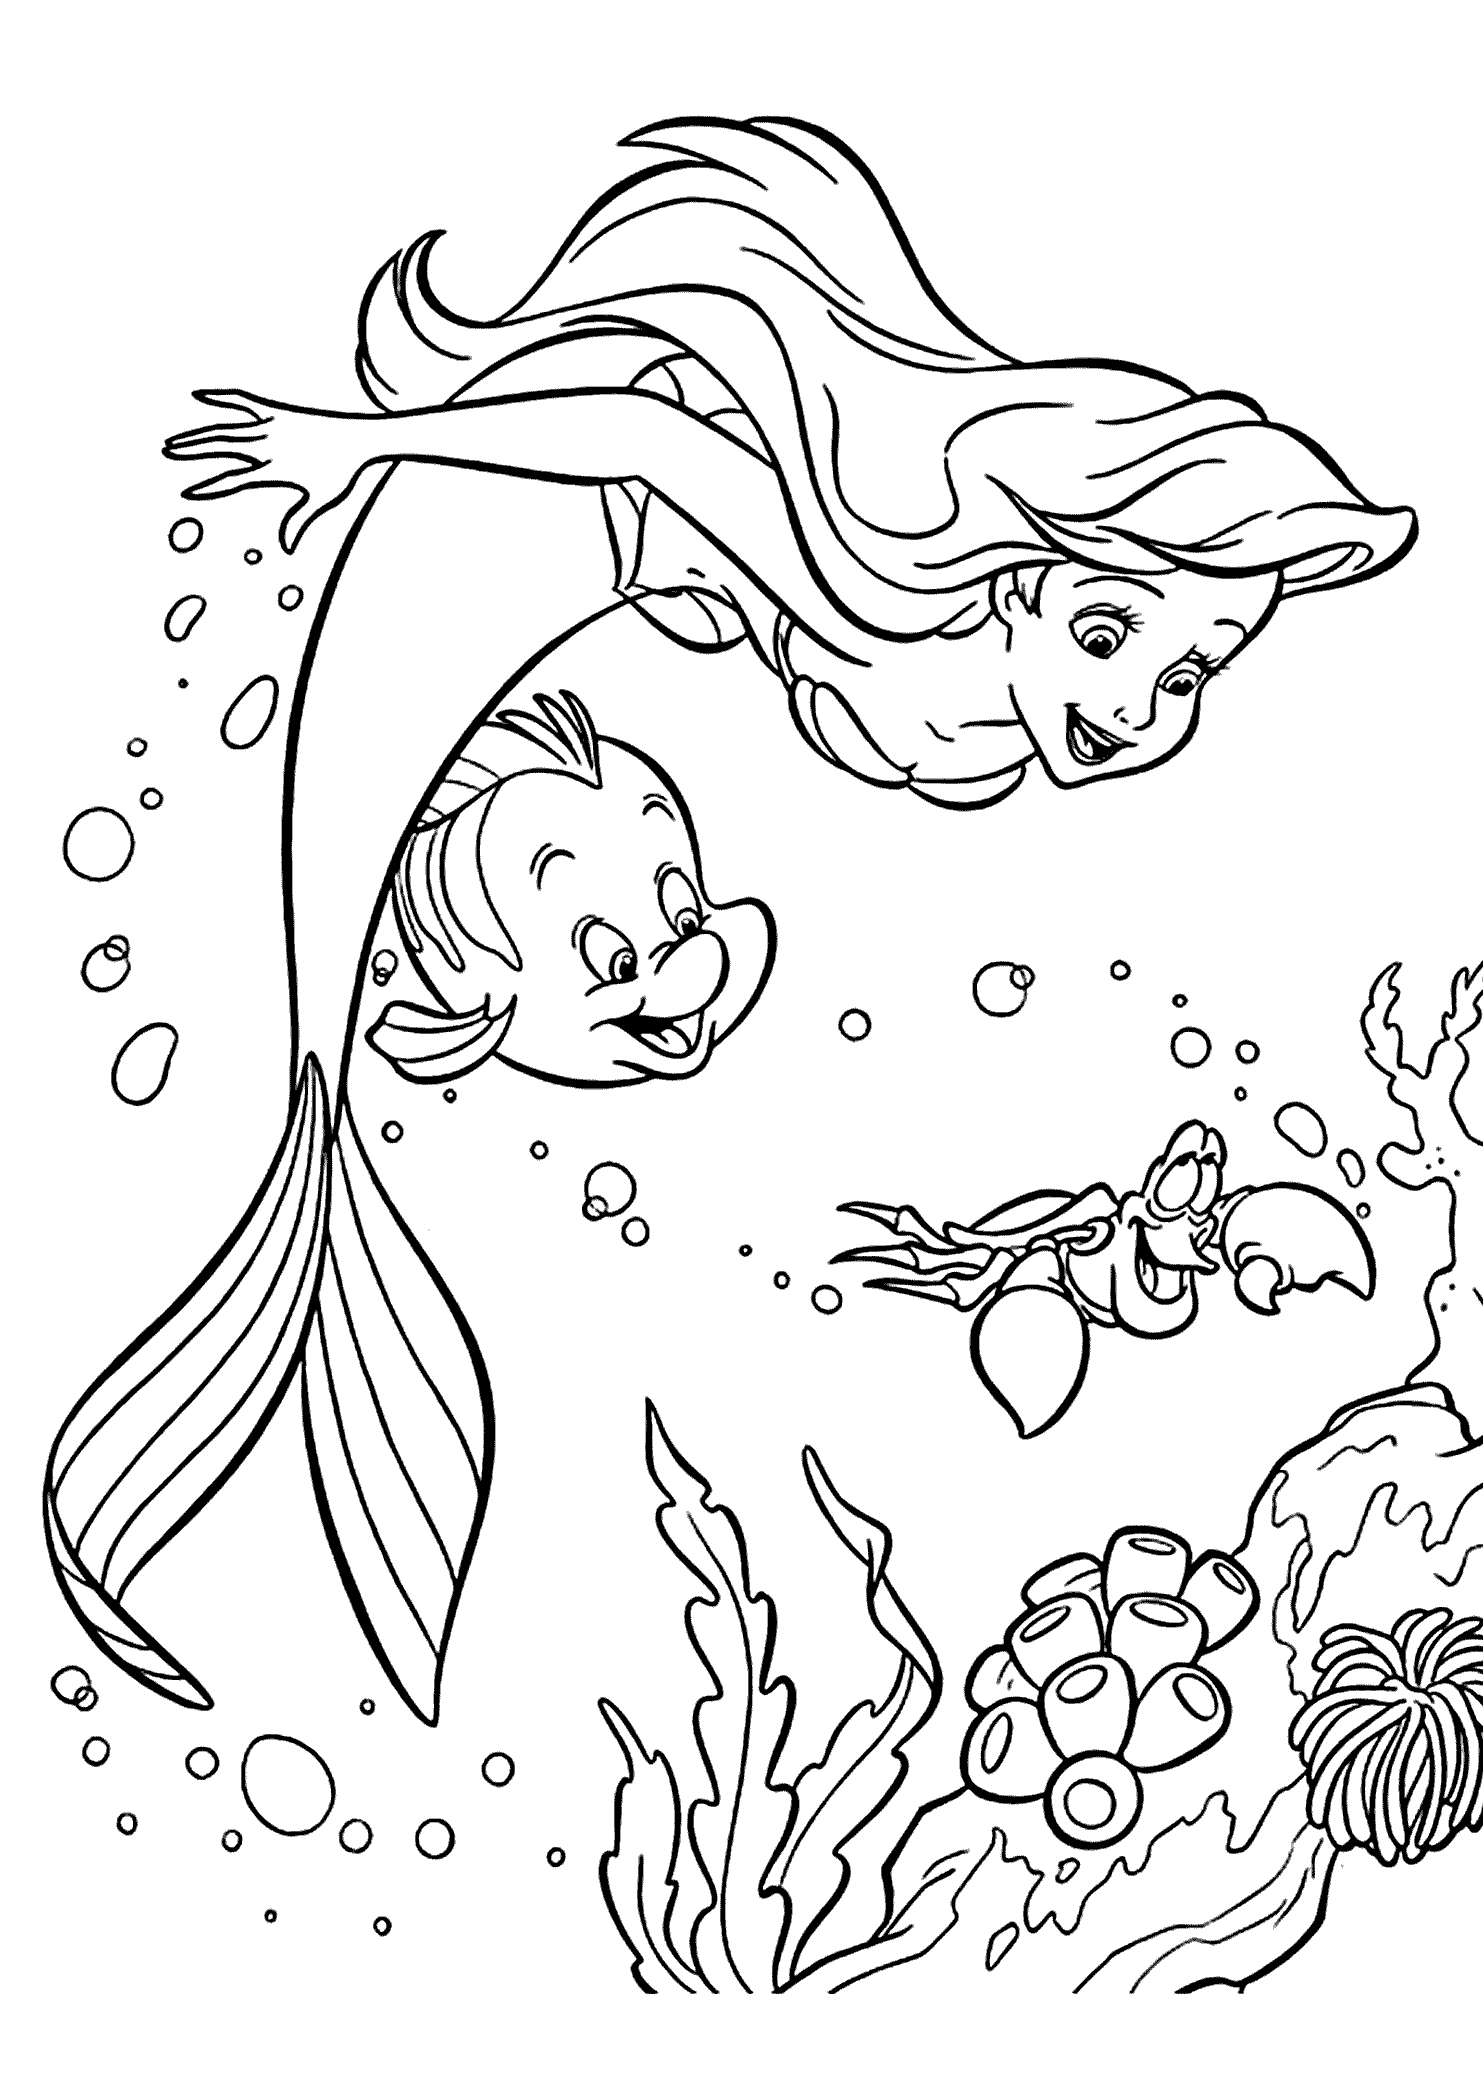 Disney Ariel Printable Coloring Pages - High Quality Coloring Pages